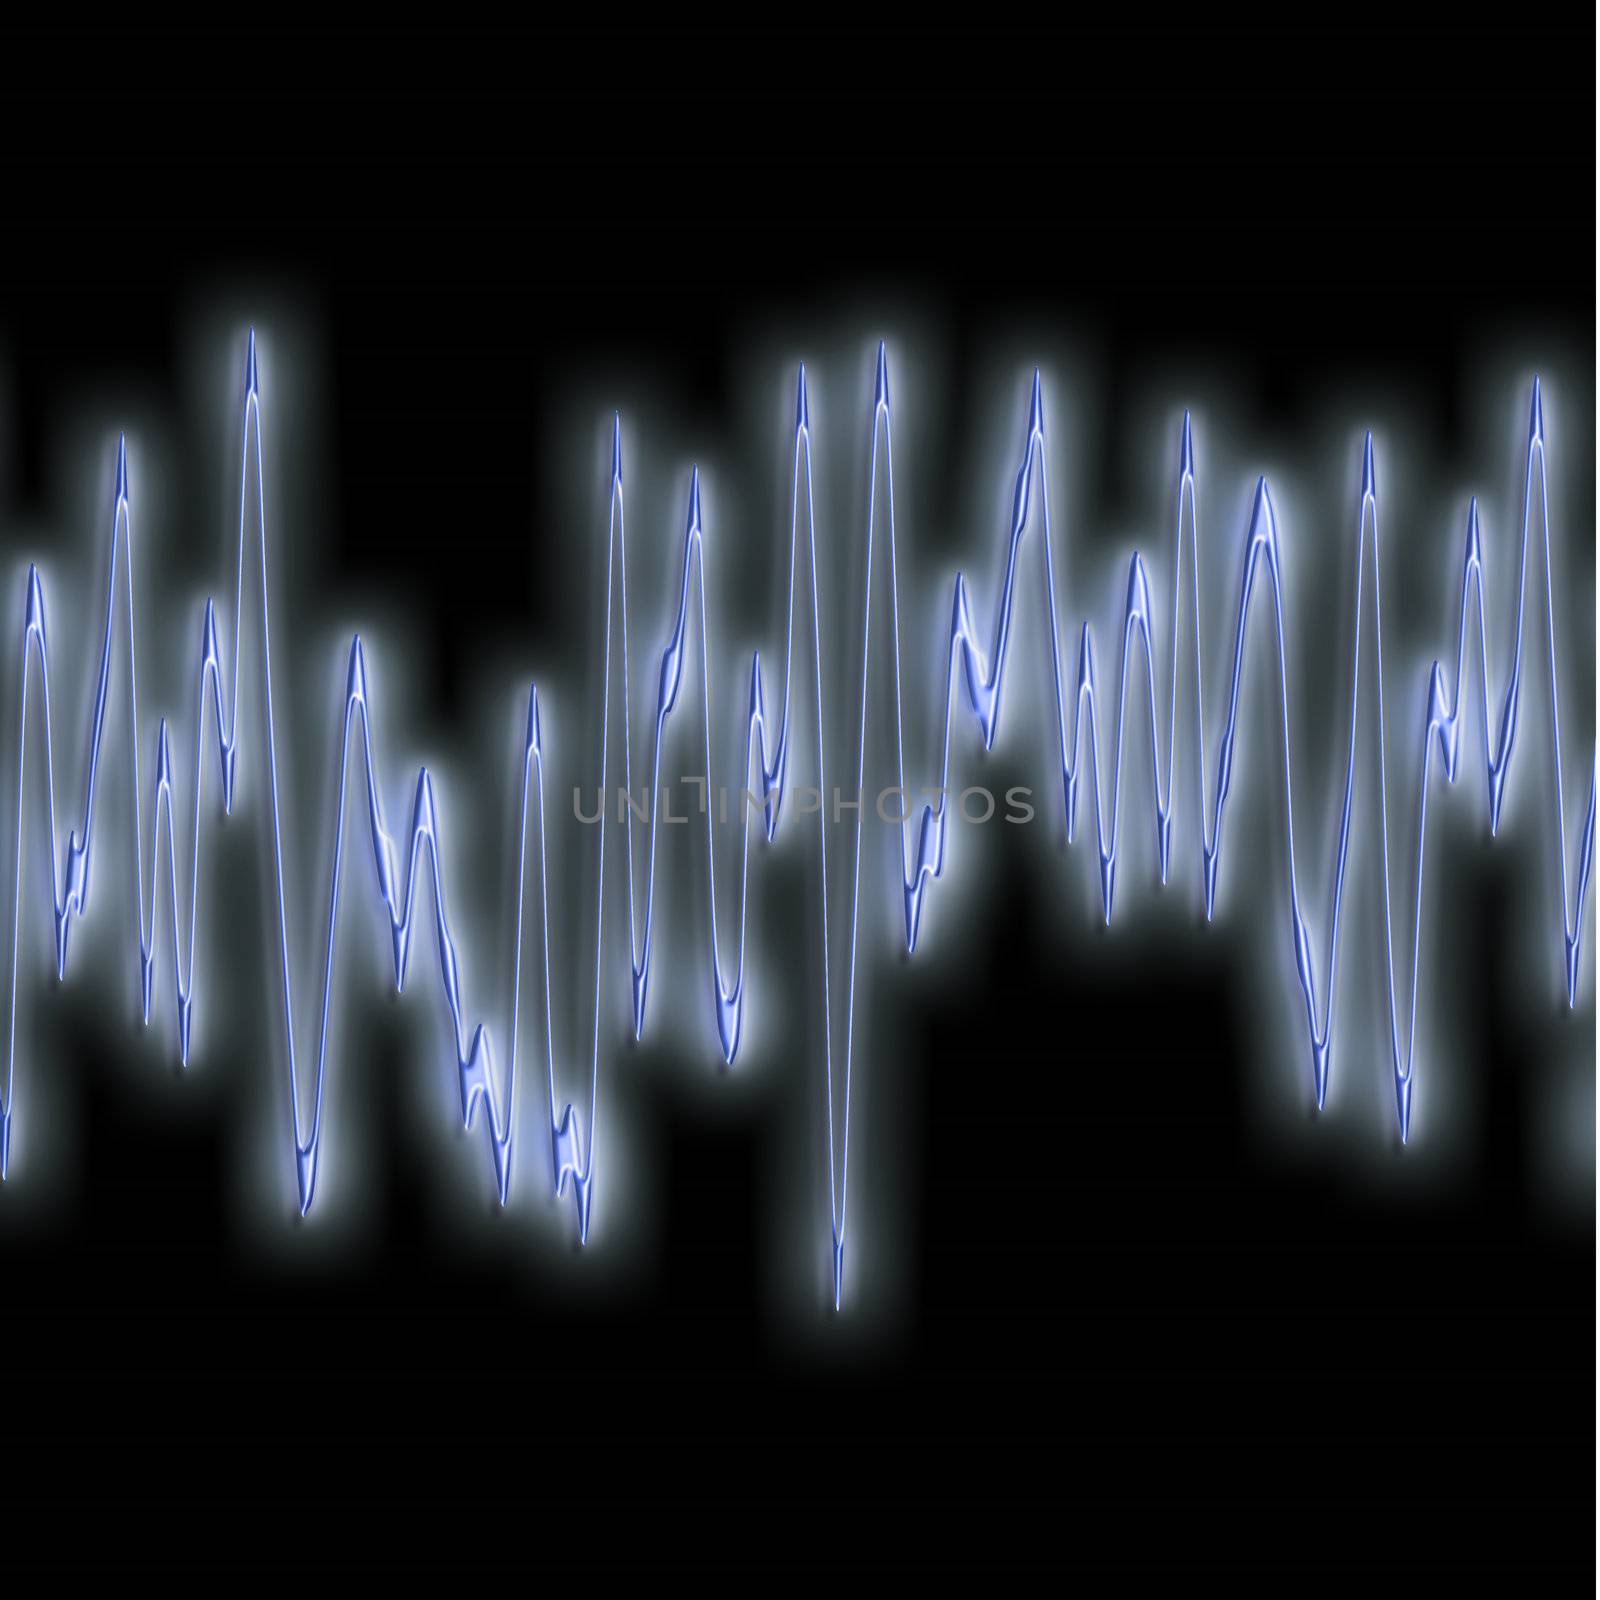 extreme sound wave by clearviewstock